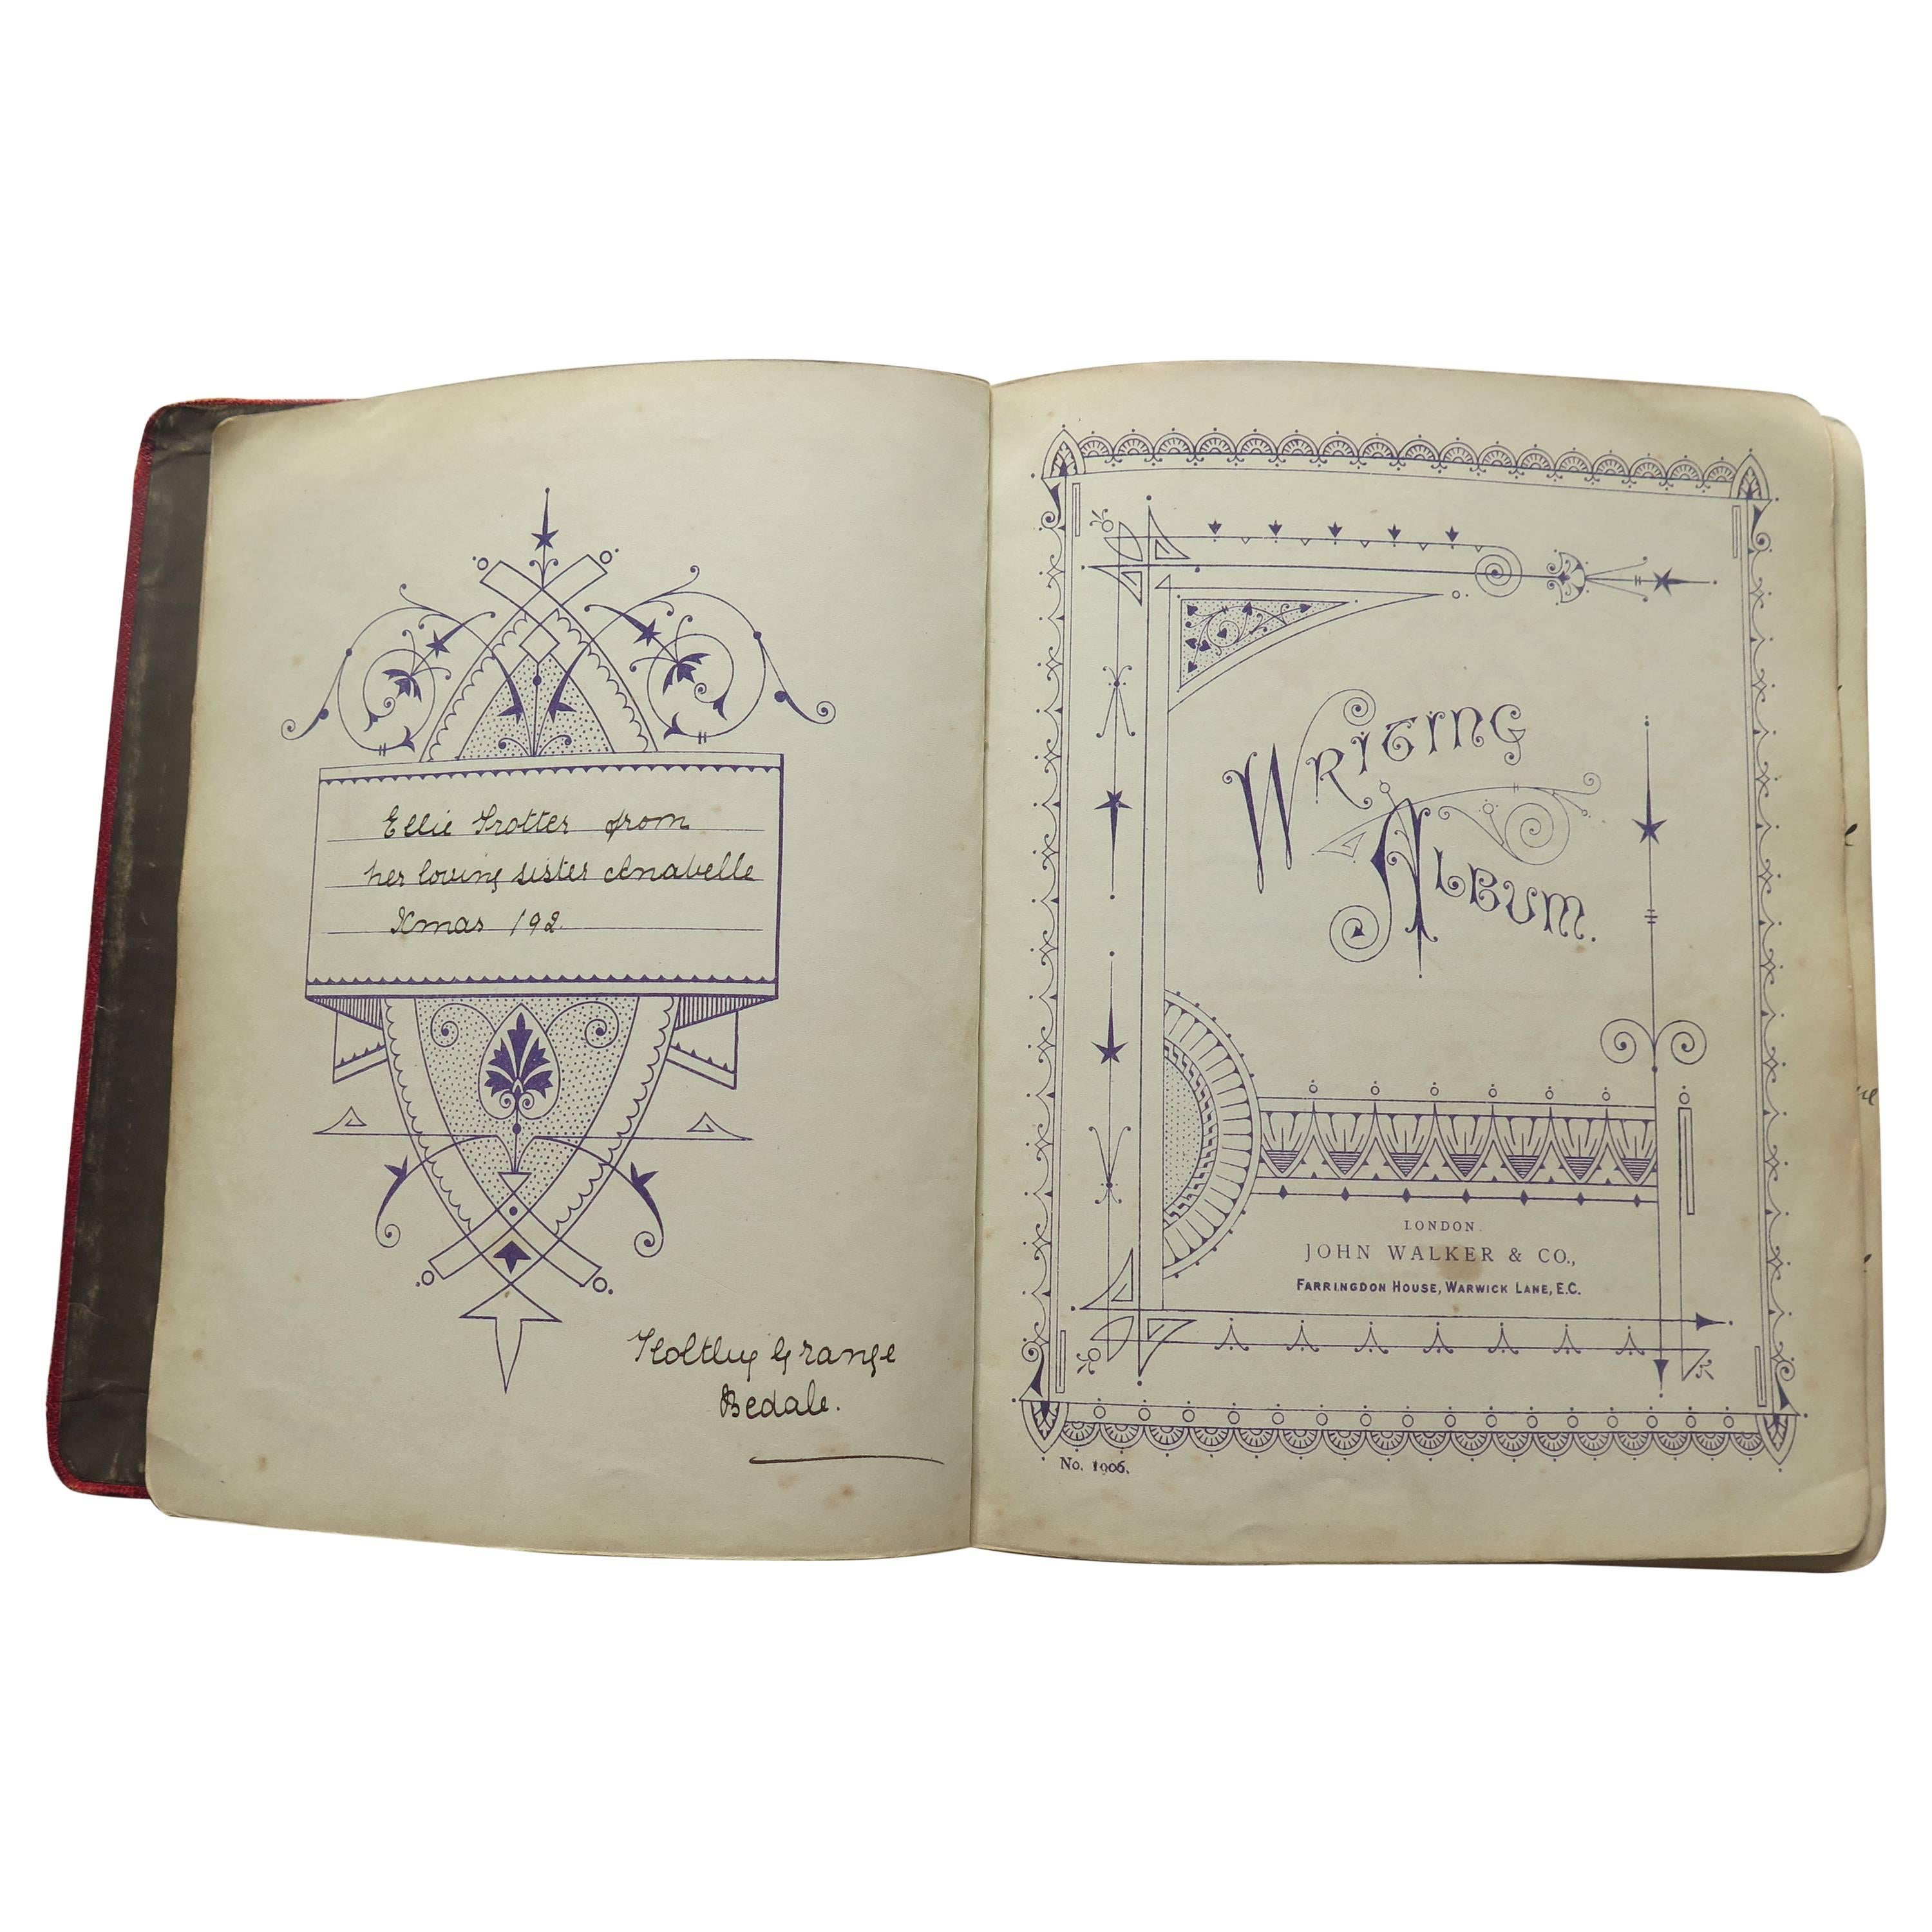 Late Victorian Writing Album, Personal Journal, Sketch Book and Stamp Album